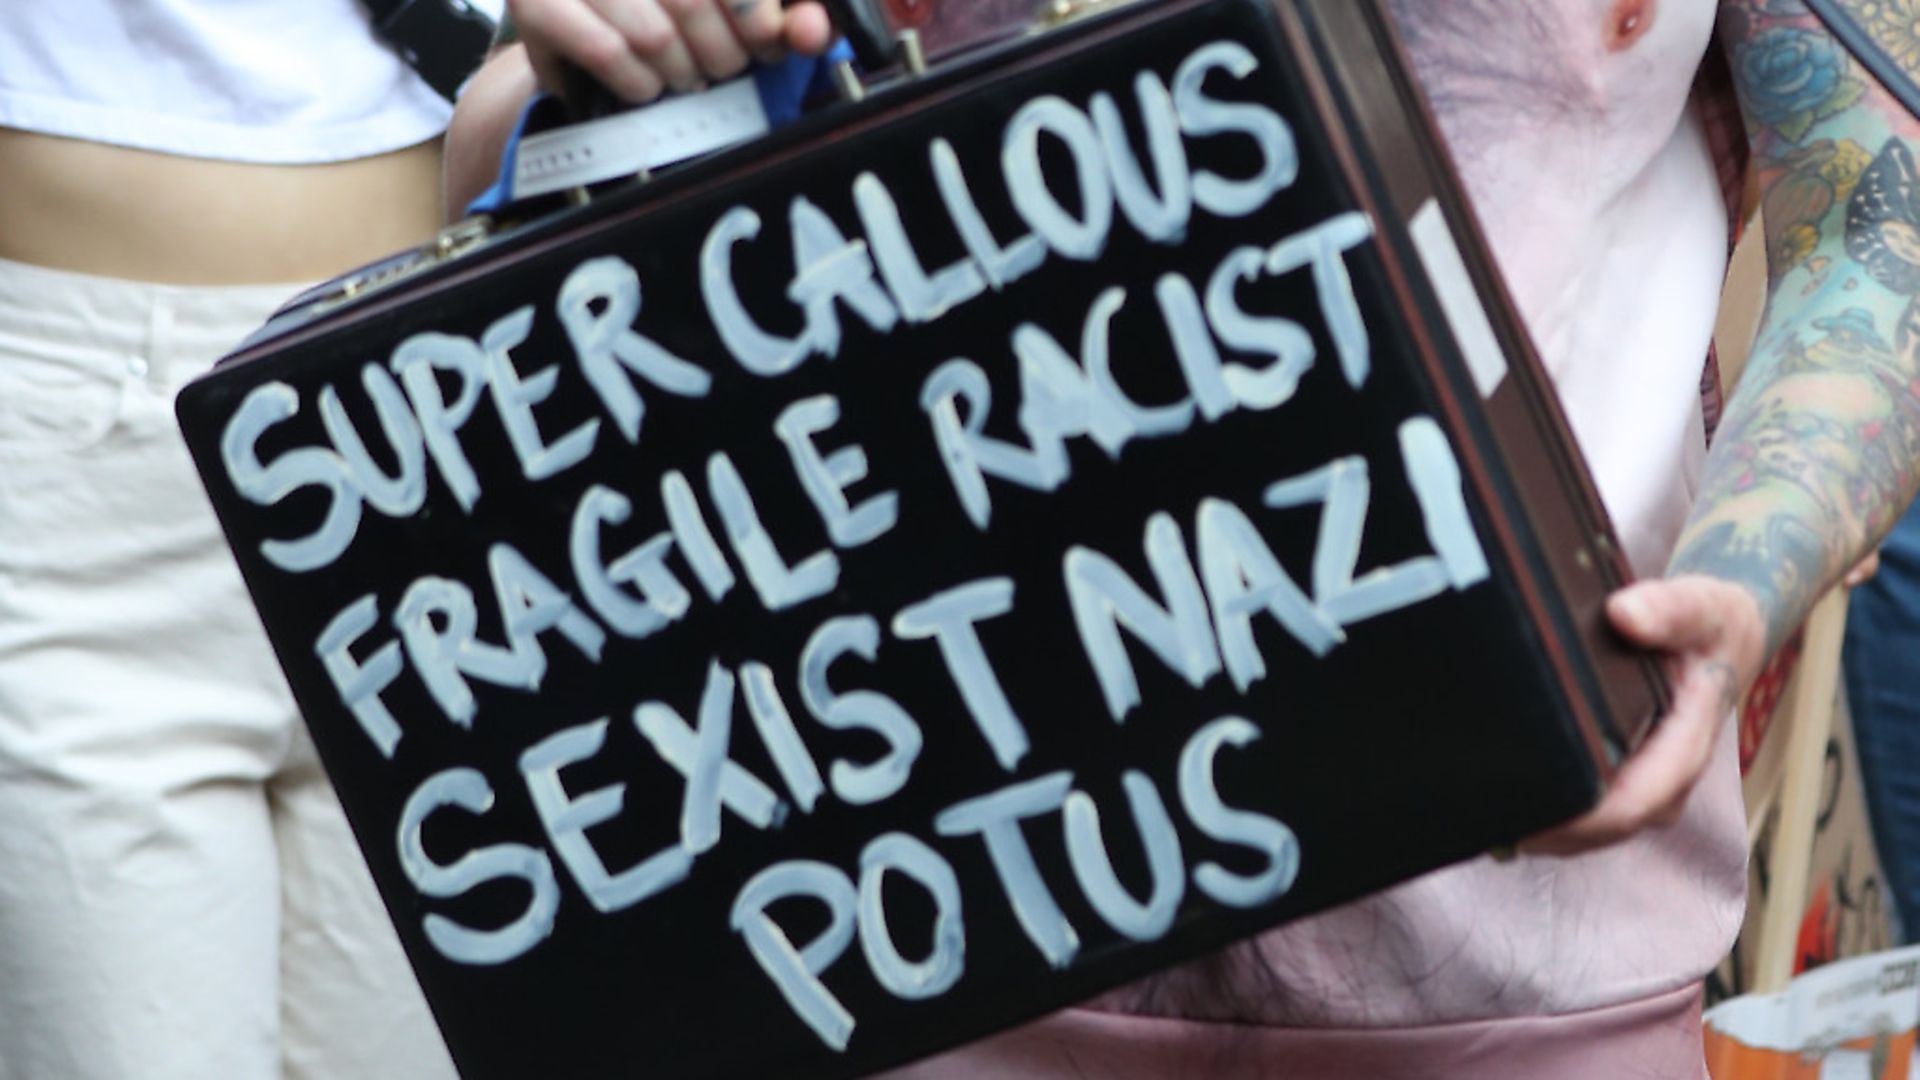 A placard being held at the Trump protests. Photograph: Gareth Fuller/PA. - Credit: PA